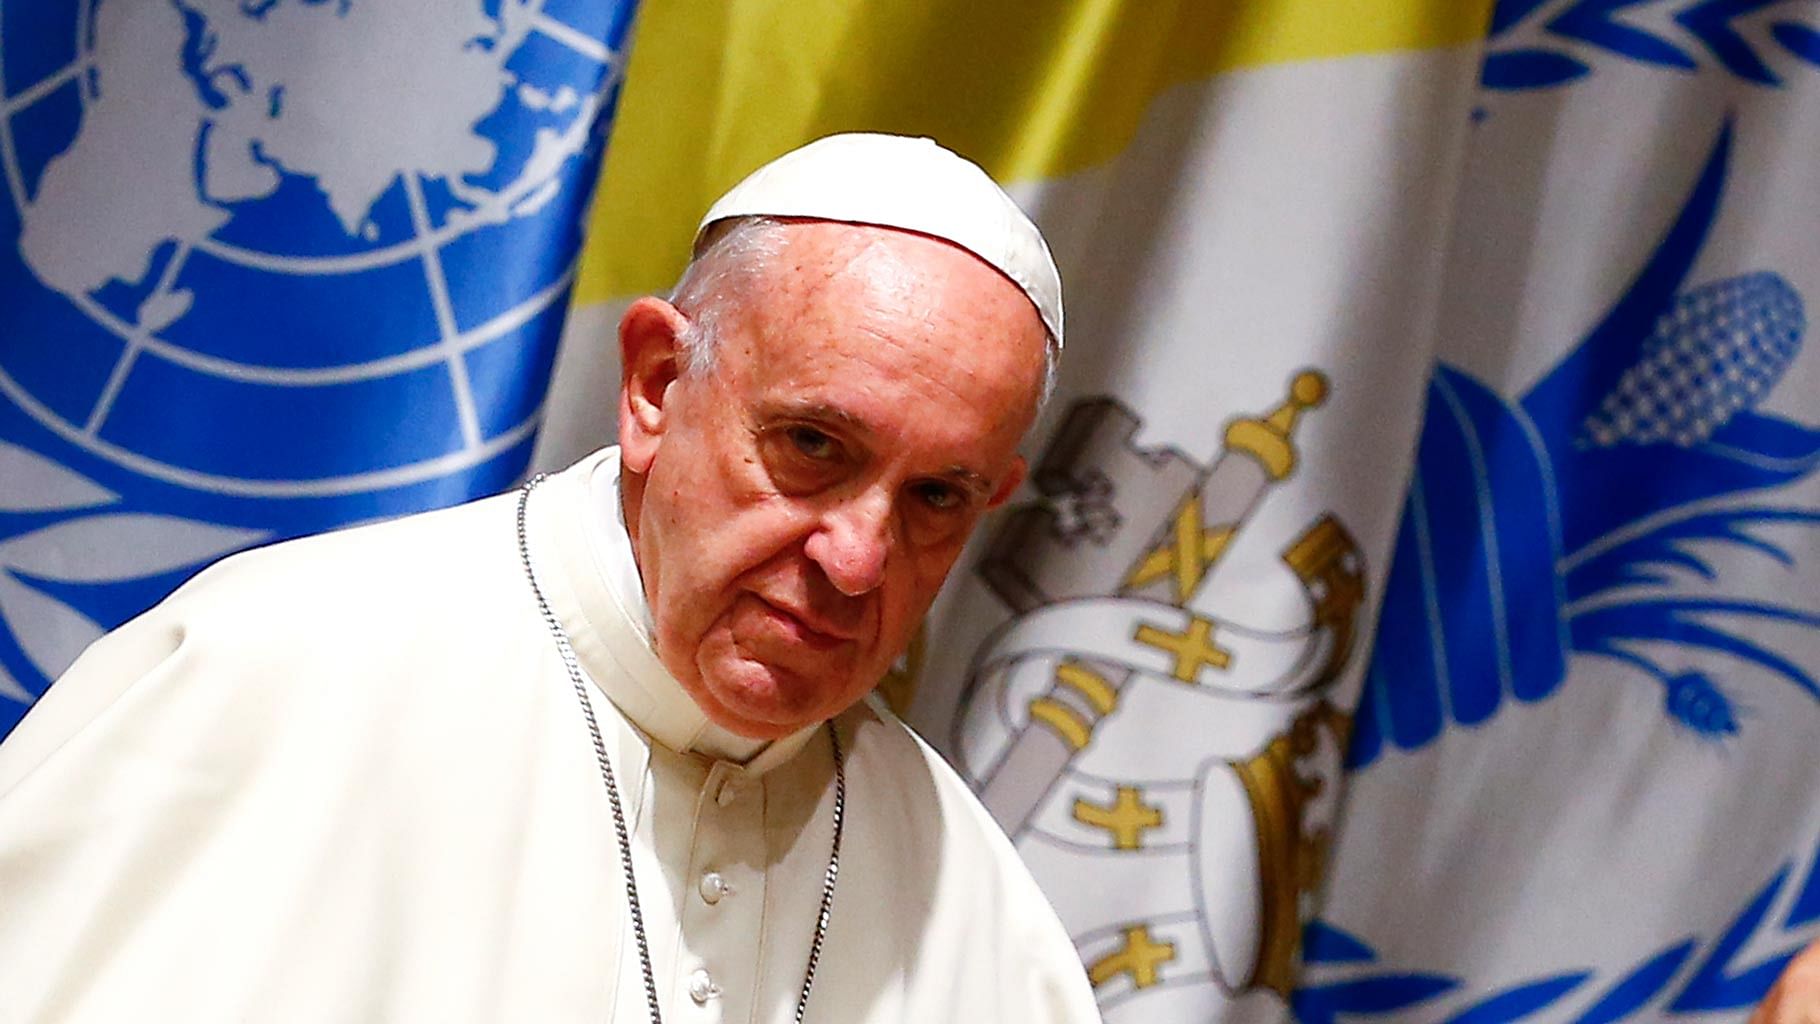 Pope Francis arrives at a visit to the United Nations World Food Program headquarters in Rome. Image used for representation.